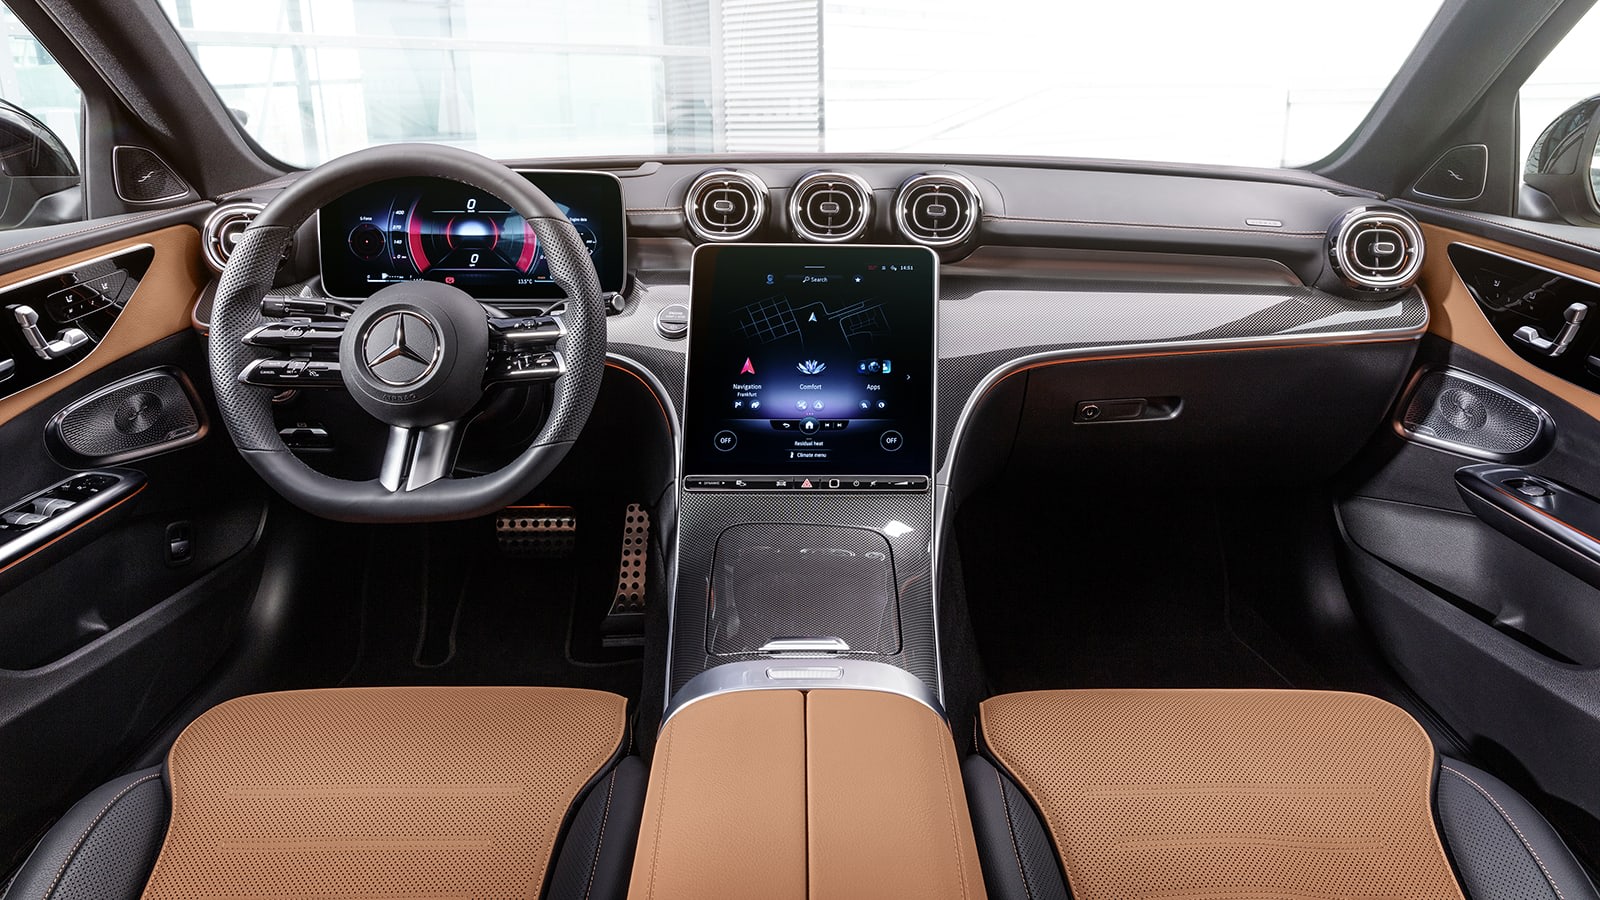 2022 Mercedes-Benz C-Class revealed with S-Class-style interior